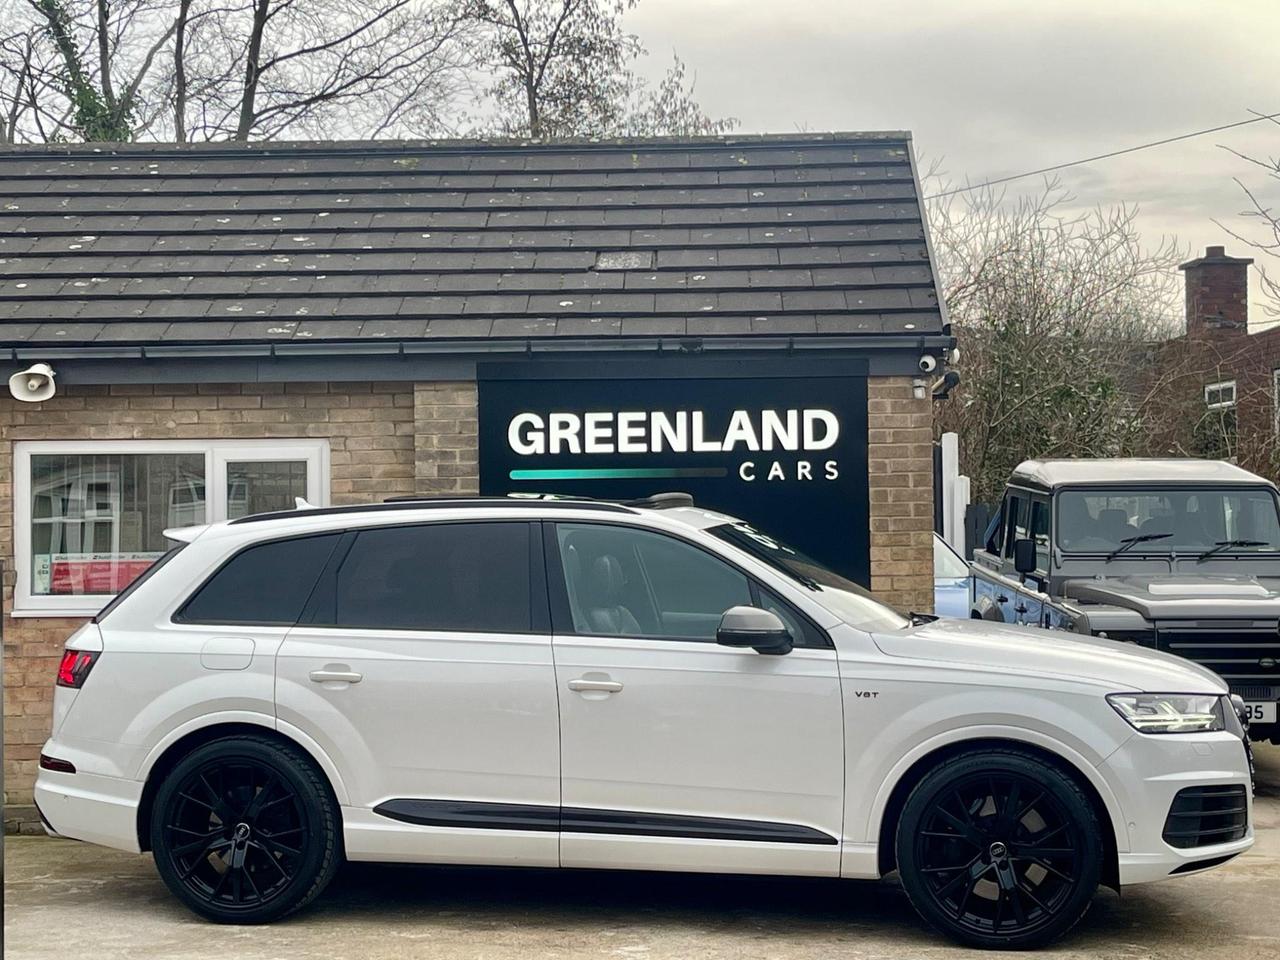 Used 2017 Audi SQ7 for sale in Sheffield